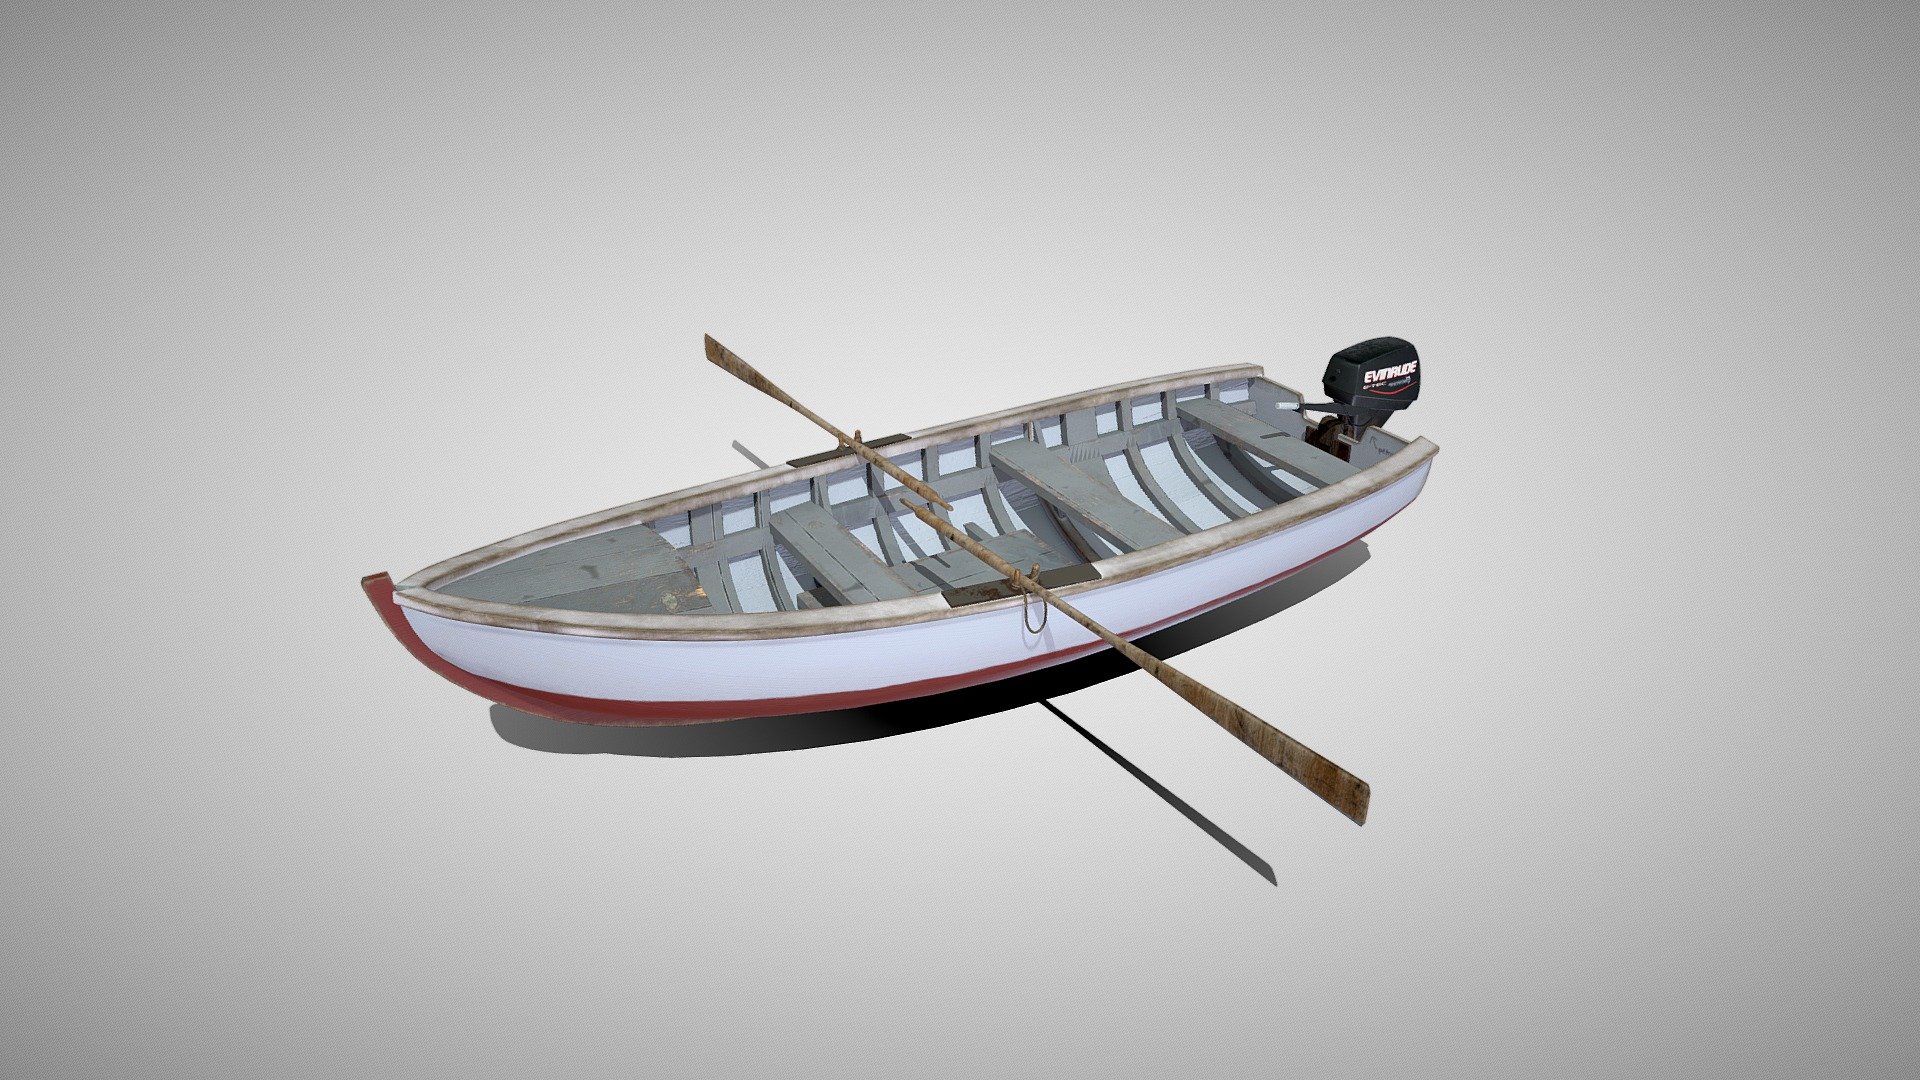 Wooden Boat


Low-poly ready to use in AR/VR, Games and PBR renders game engines
Textures are in PNG format 4096x4096 4K PBR Metalness 1 set
Separate texture files for Unity PBR Specular Smoothness and Metallic Smoothness
Separate texture files for Unreal Engine 4
If you need any other file format you can always request it.
All formats include materials and textures

SketchfabWeeklyChallenge - Wooden Boat Low-poly - Buy Royalty Free 3D model by MaX3Dd 3d model